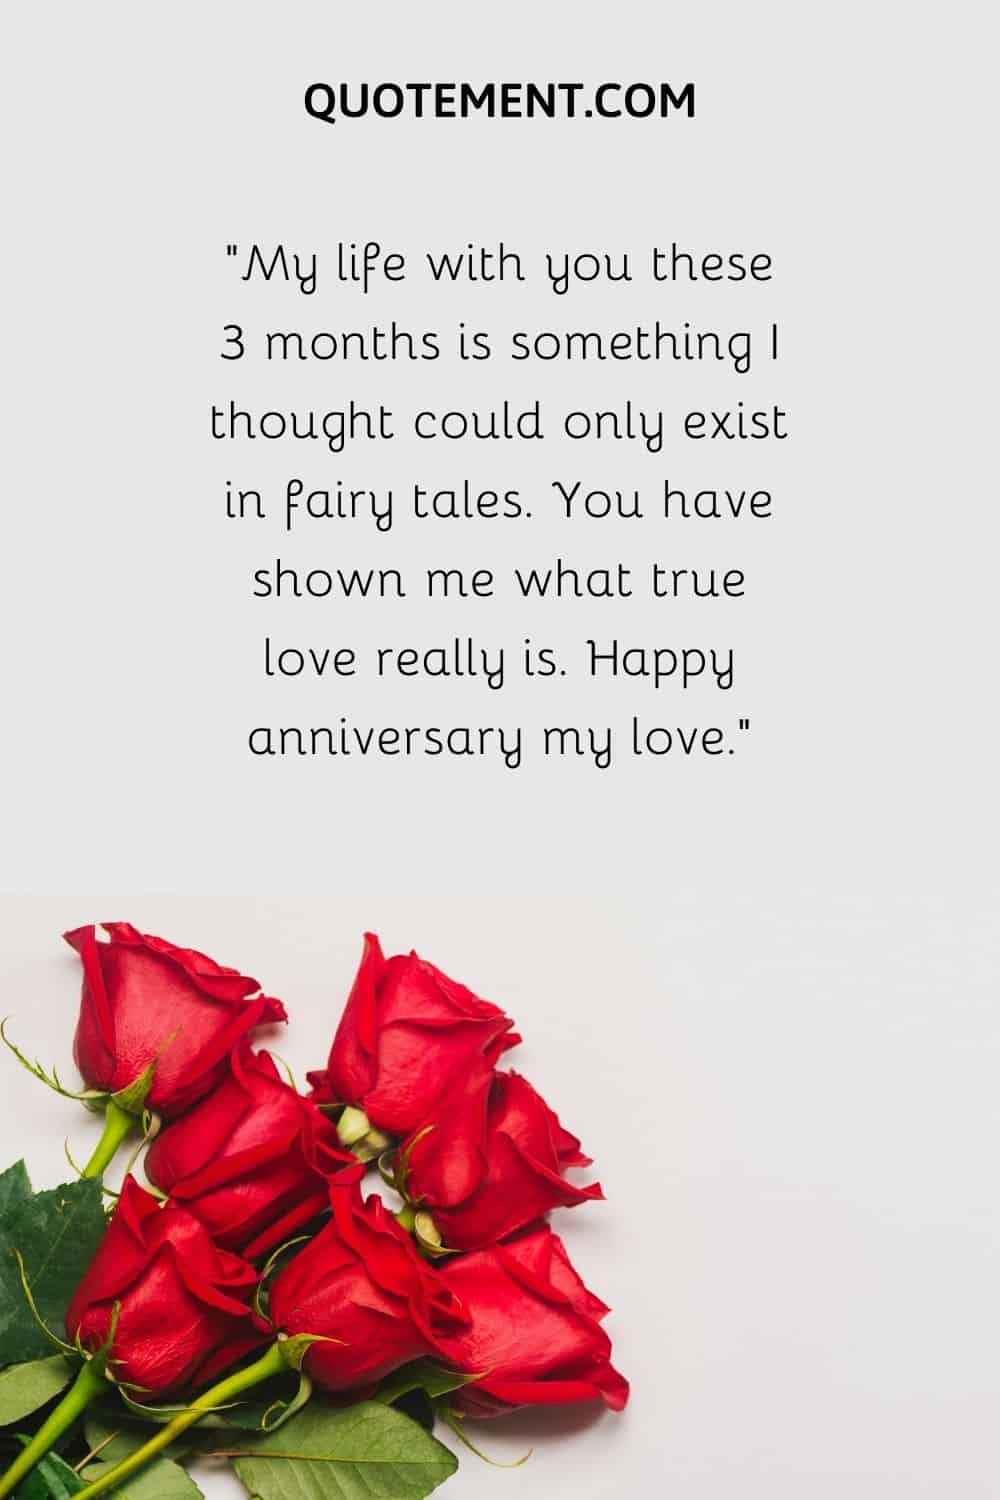 “My life with you these 3 months is something I thought could only exist in fairy tales. You have shown me what true love really is. Happy anniversary my love.”